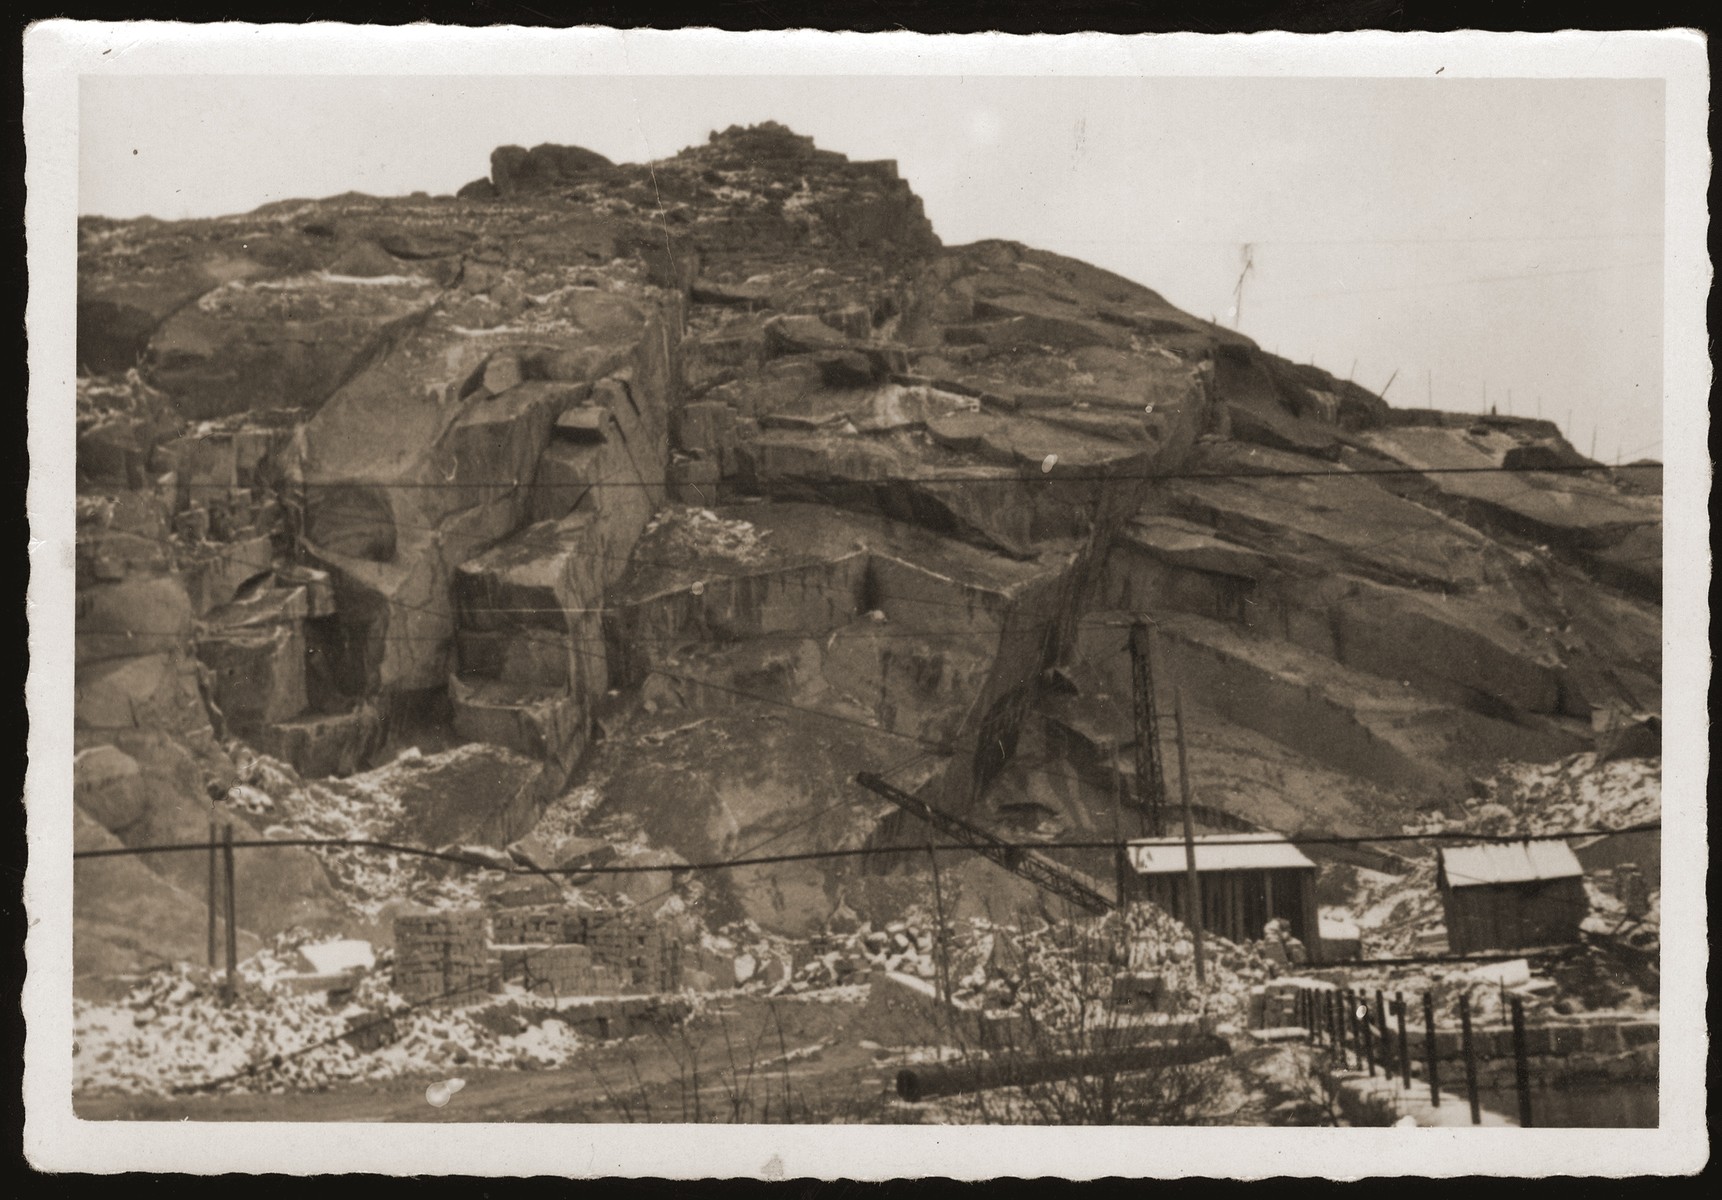 View of the quarry at the Flossenbuerg concentration camp, taken during a return visit to the camp on the first or second anniversary of the liberation by Jewish DPs living in the city of Weiden, Germany.

During his incarceration in Flossenbuerg, the donor had been forced to work in the quarries, and had been seriously injured when he got caught between two hopper cars carrying materials from the site.